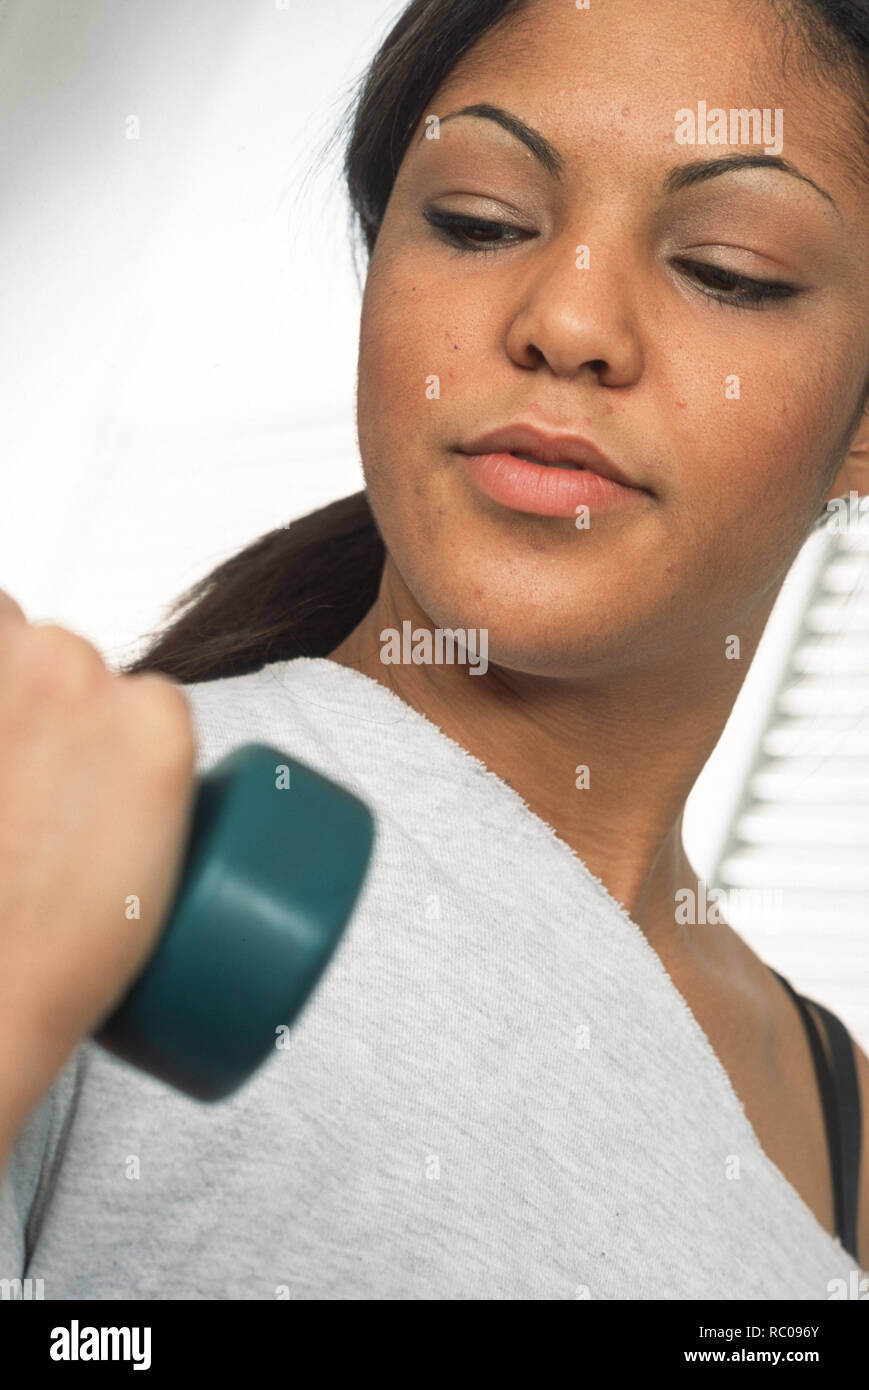 Young female adult lifting weights, USA Stock Photo